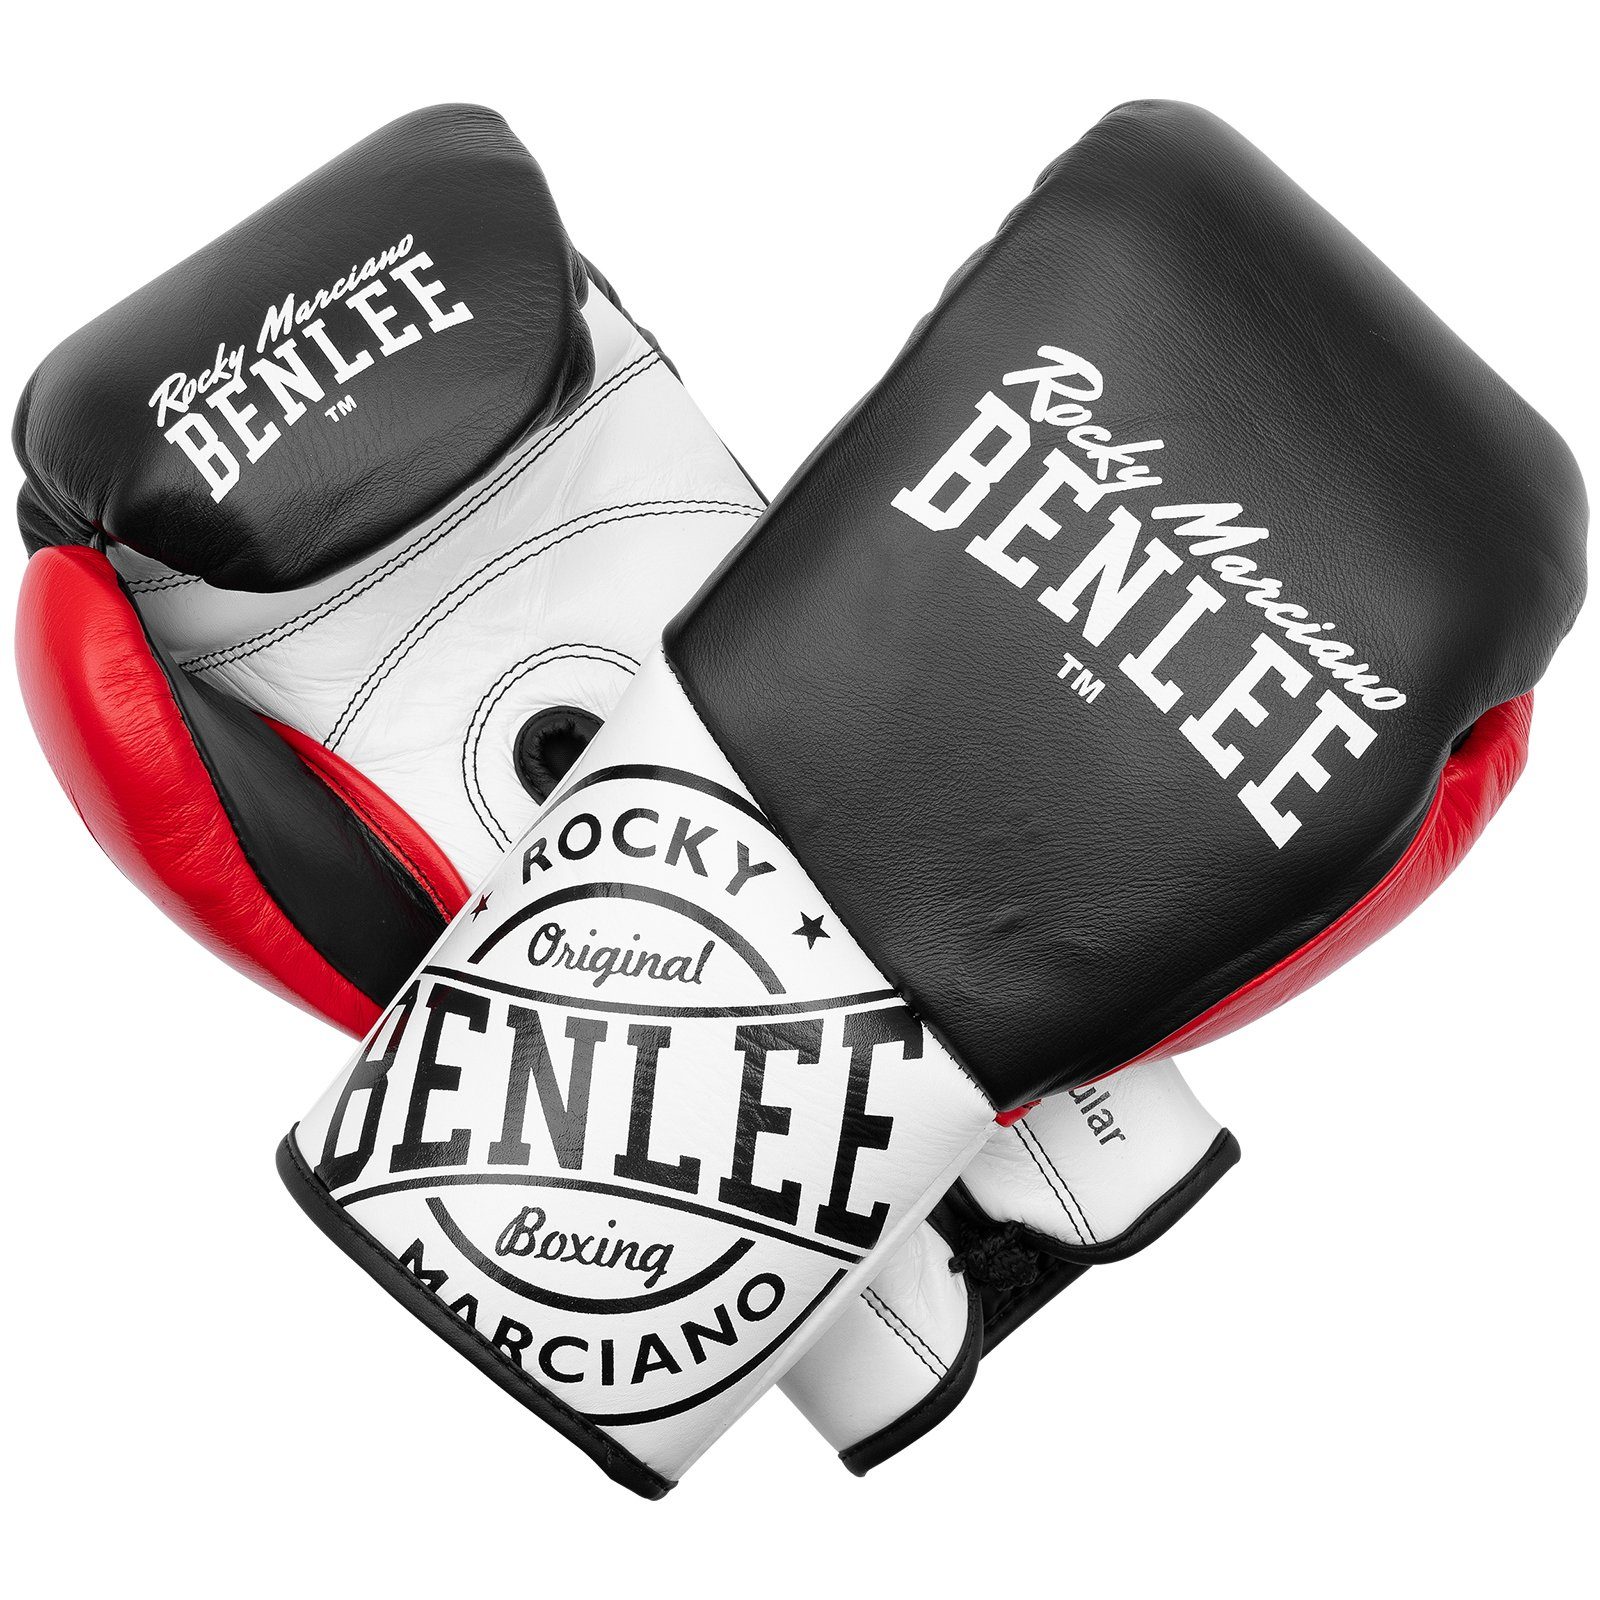 Marciano Benlee Boxhandschuhe Black/Red/White CYCLONE Rocky